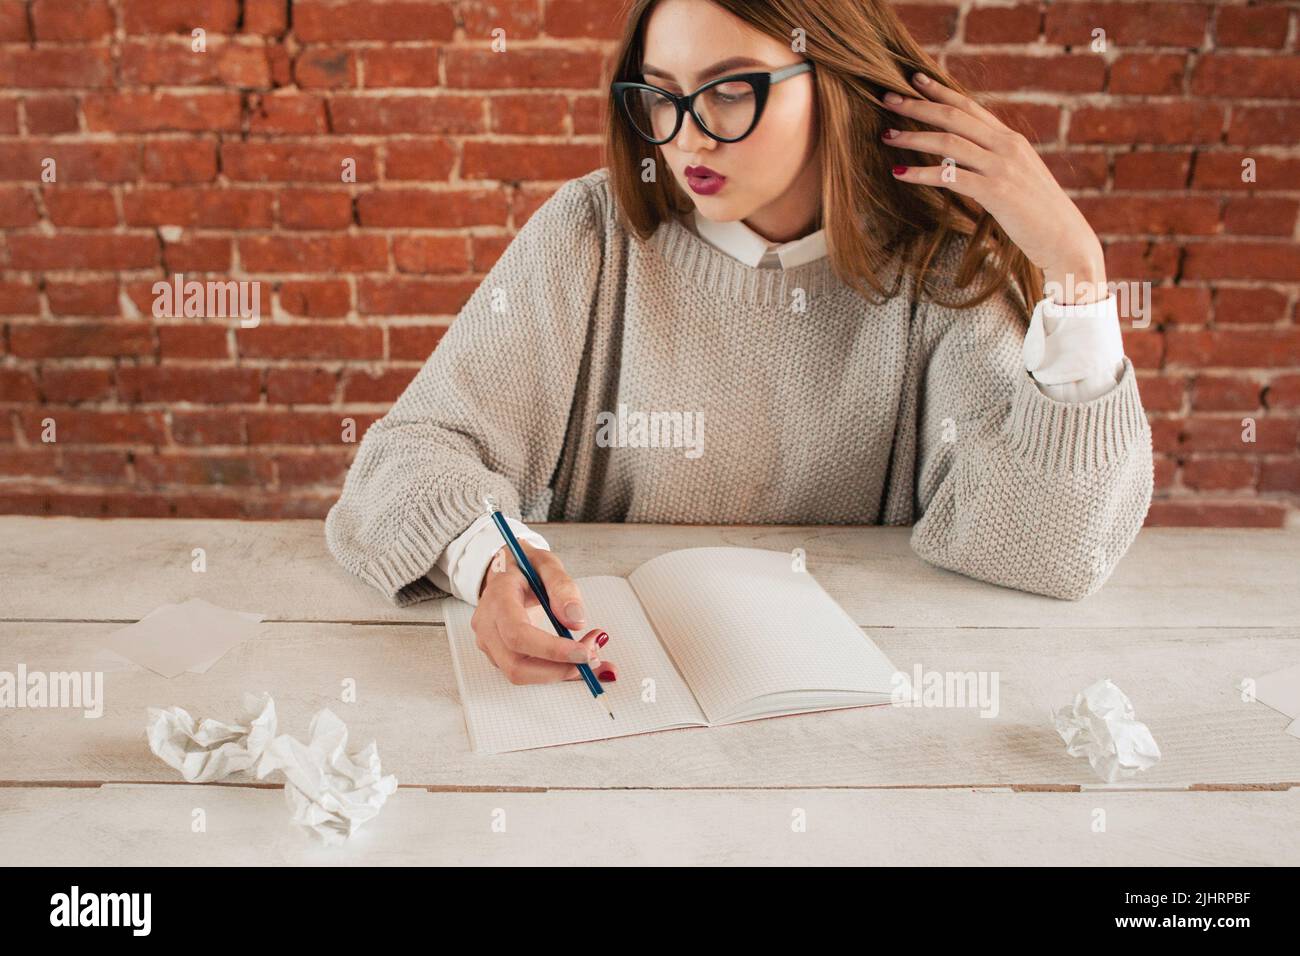 Surprised woman sitting at table with notebook Stock Photo